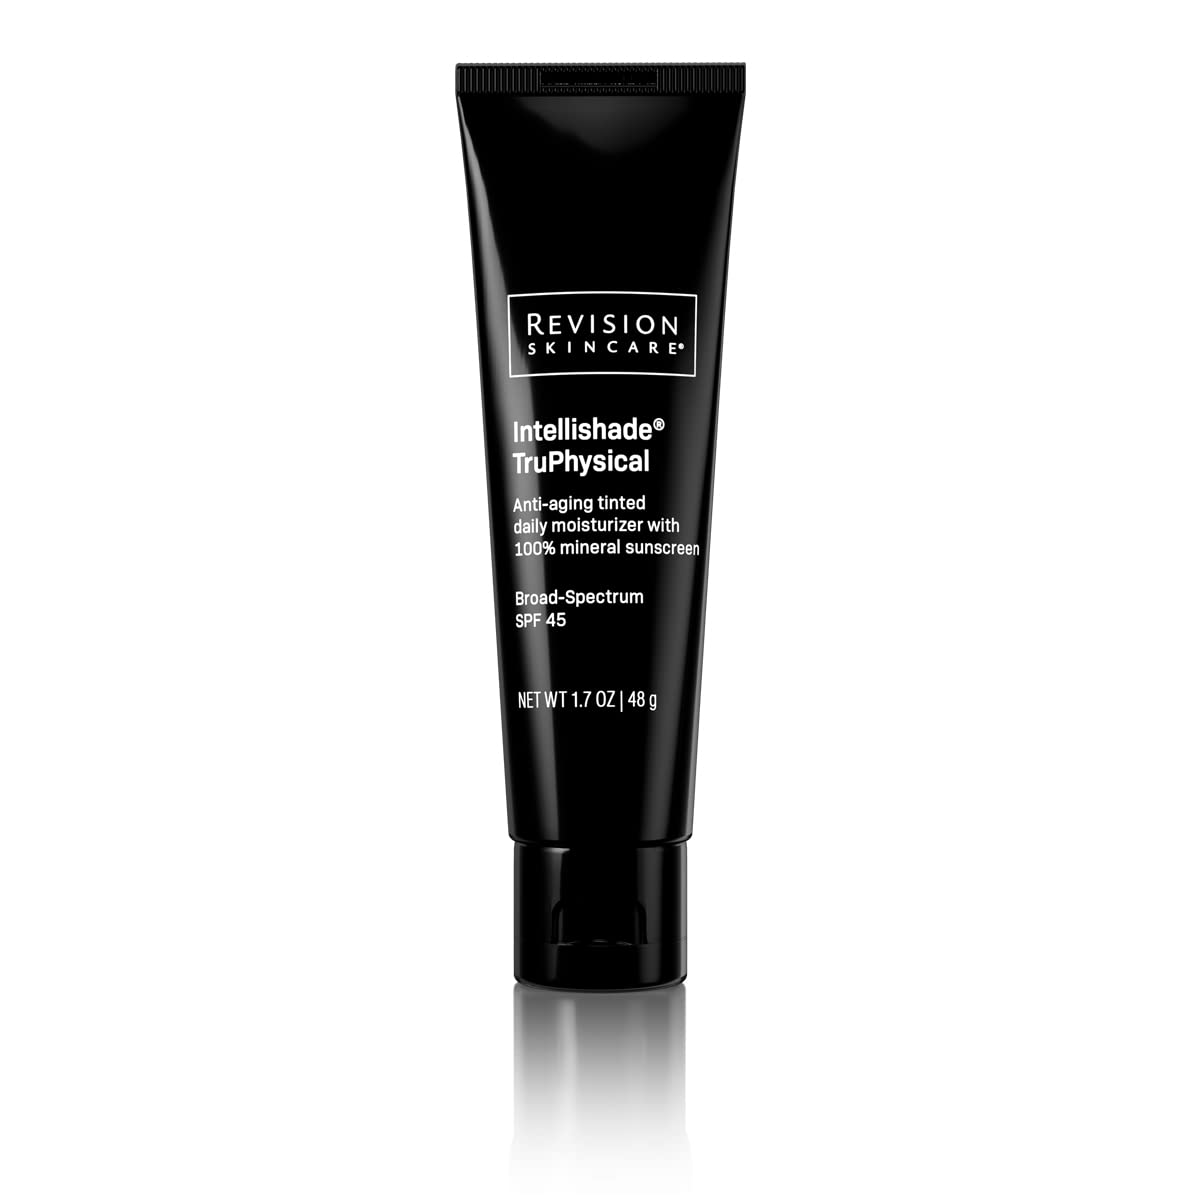 Revision Skincare Intellishade Truphysical 5-in-1